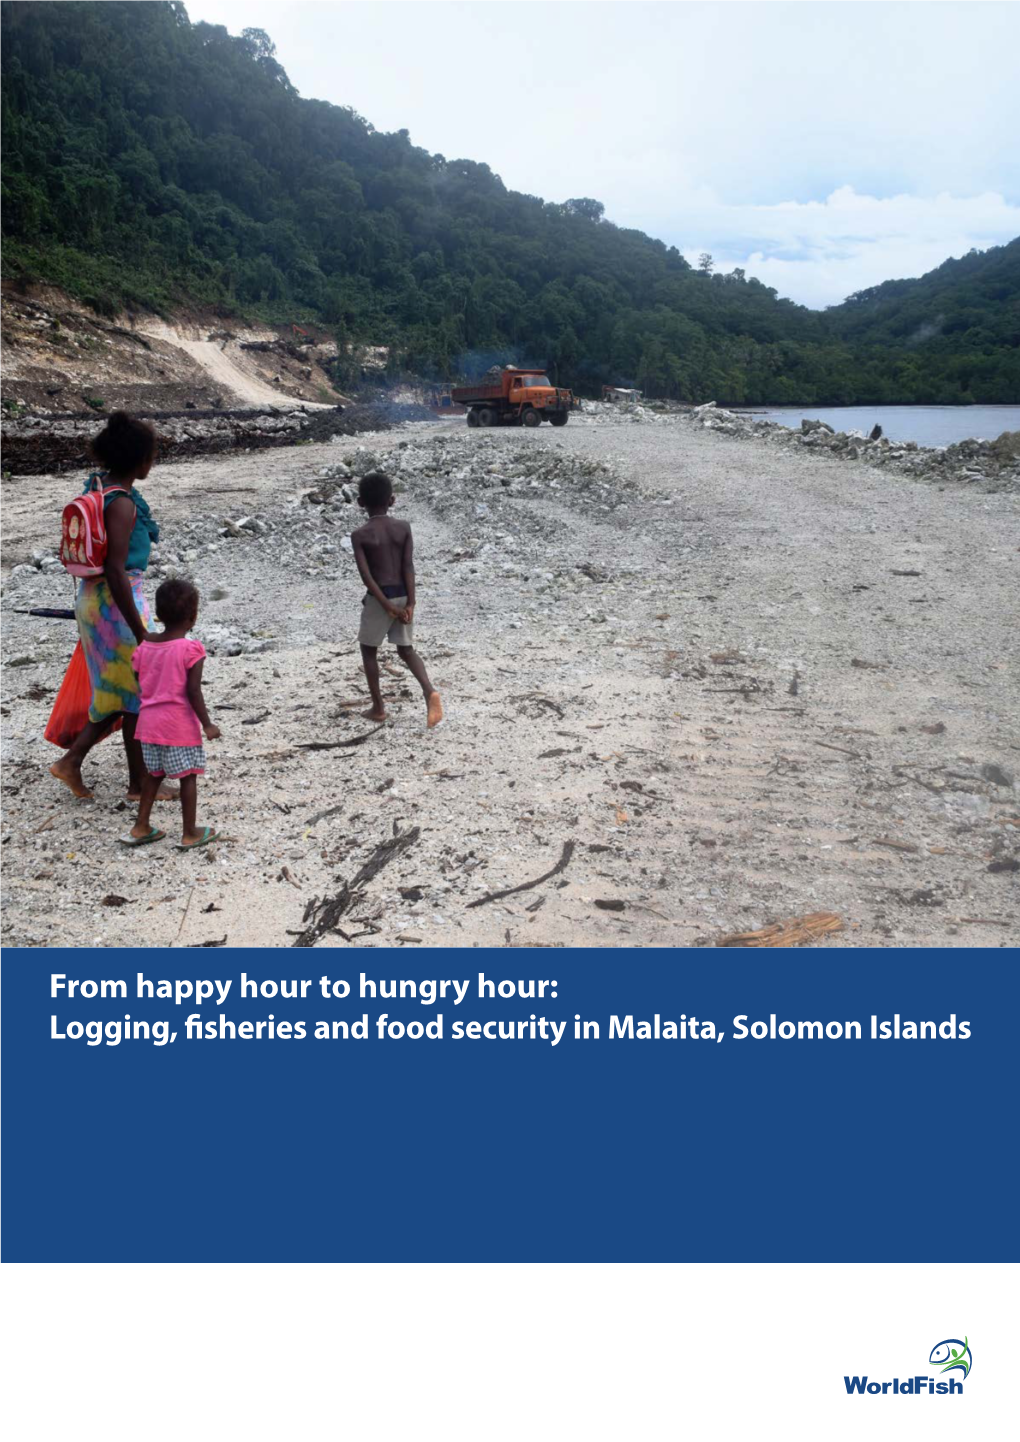 Logging, Fisheries and Food Security in Malaita, Solomon Islands from Happy Hour to Hungry Hour: Logging, Fisheries and Food Security in Malaita, Solomon Islands